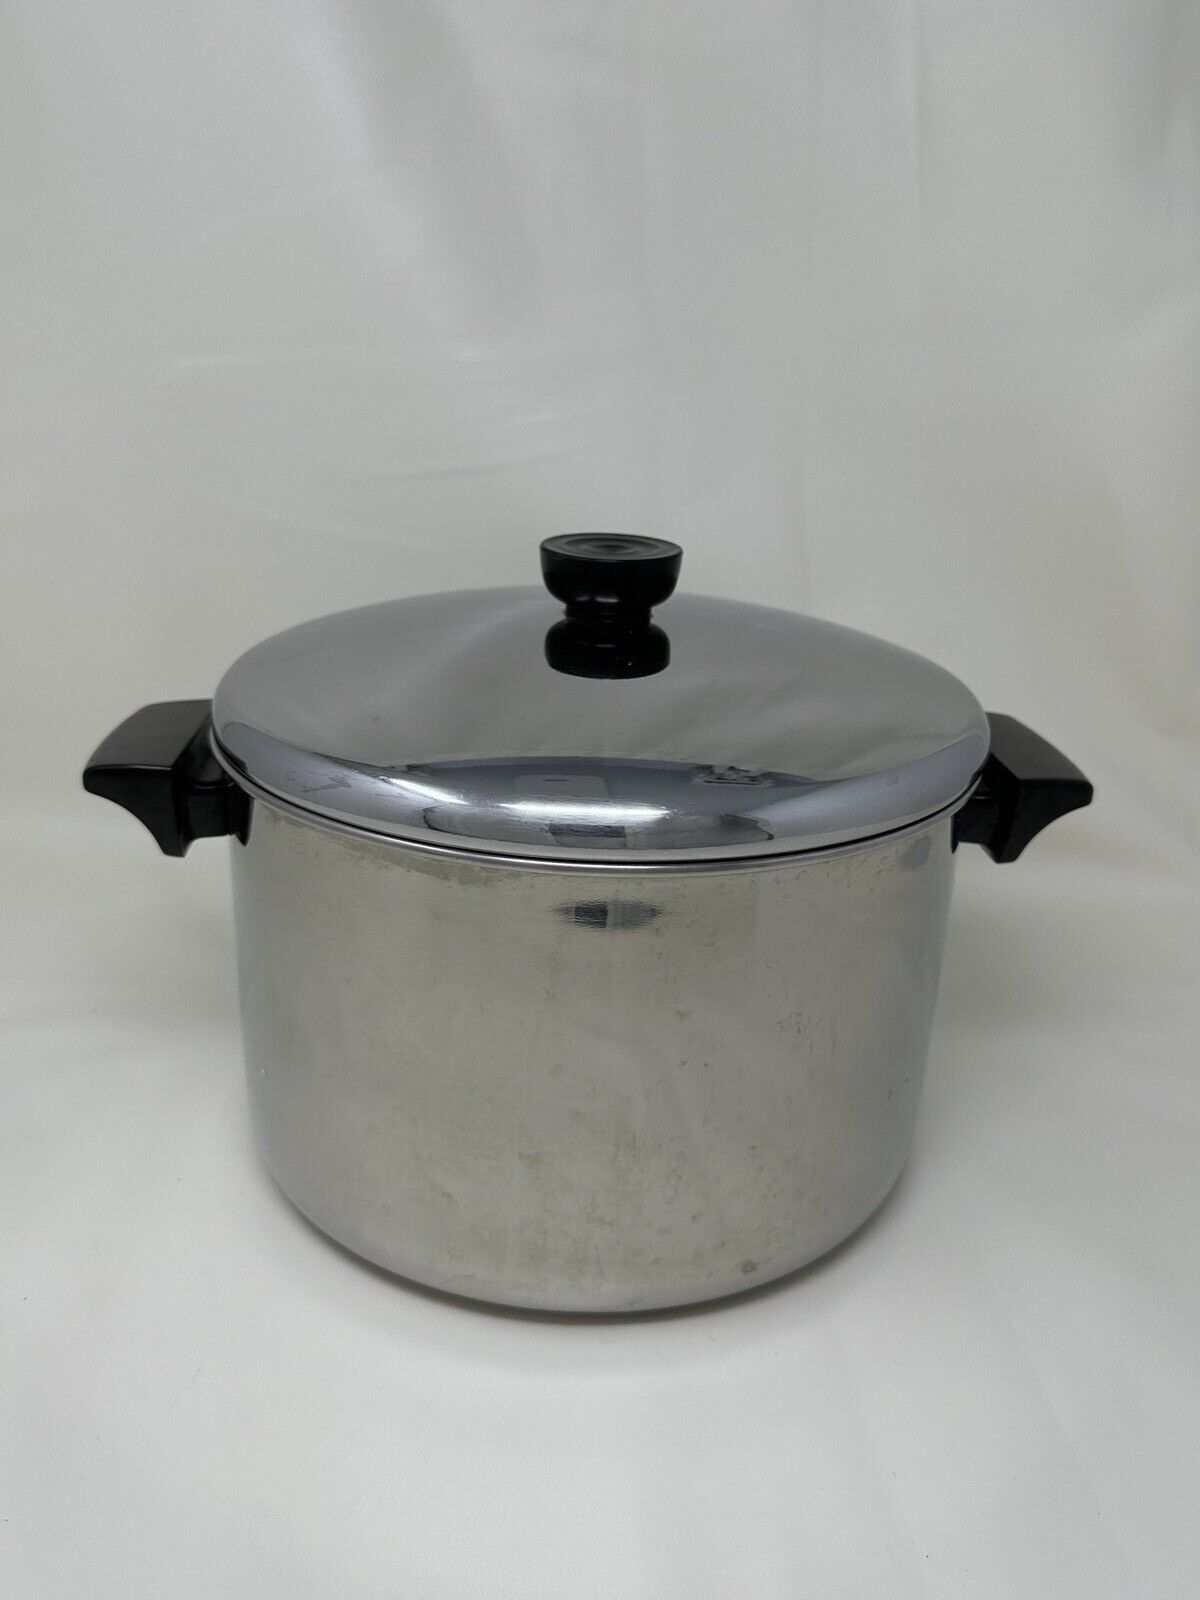 Revere Ware 1801 6 Qt Stock Pot W/Lid Stainless Steel Tri-Ply Disc Bottom